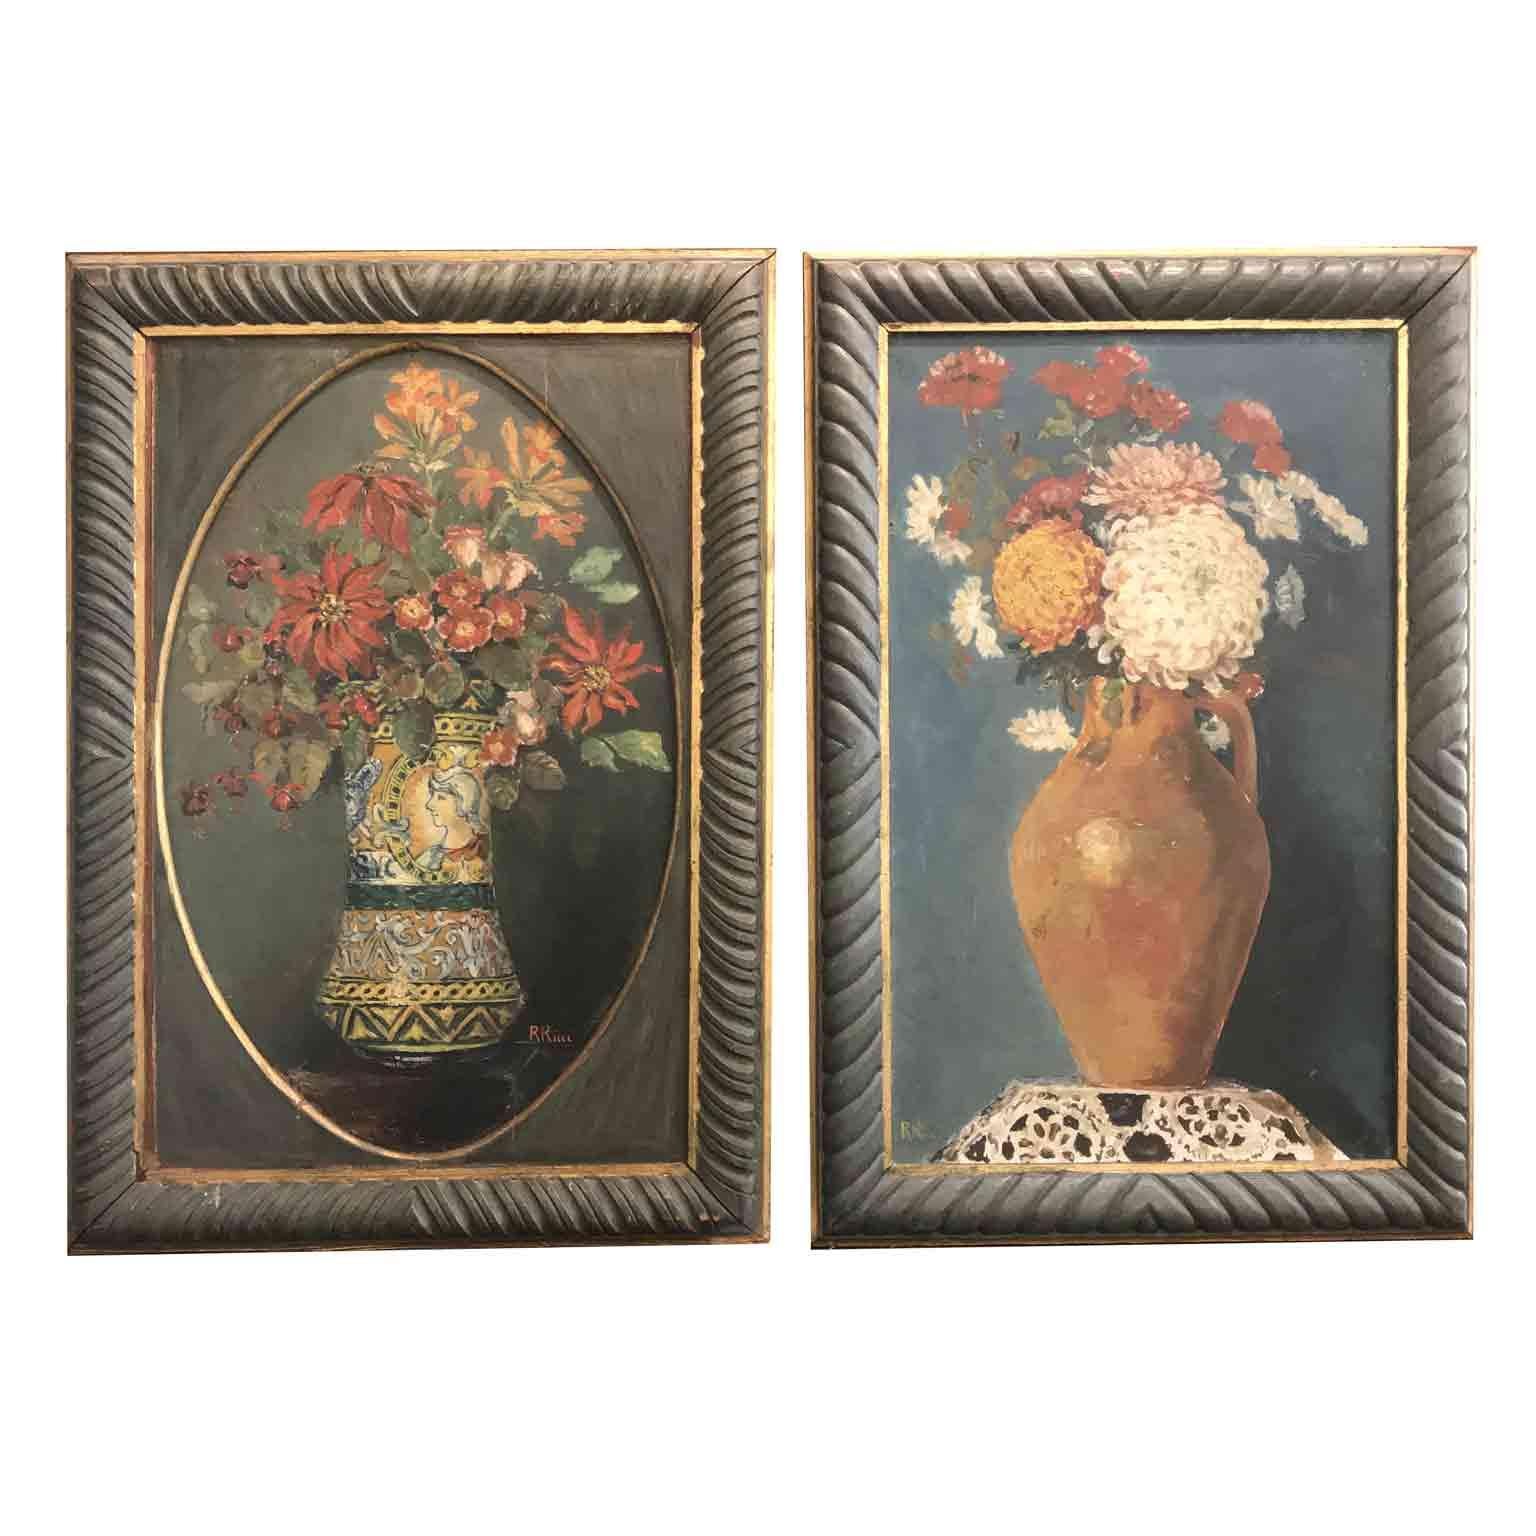 Canvas Pair of Italian Flower Still life Paintings by Ricci 20th Century Green Frames For Sale